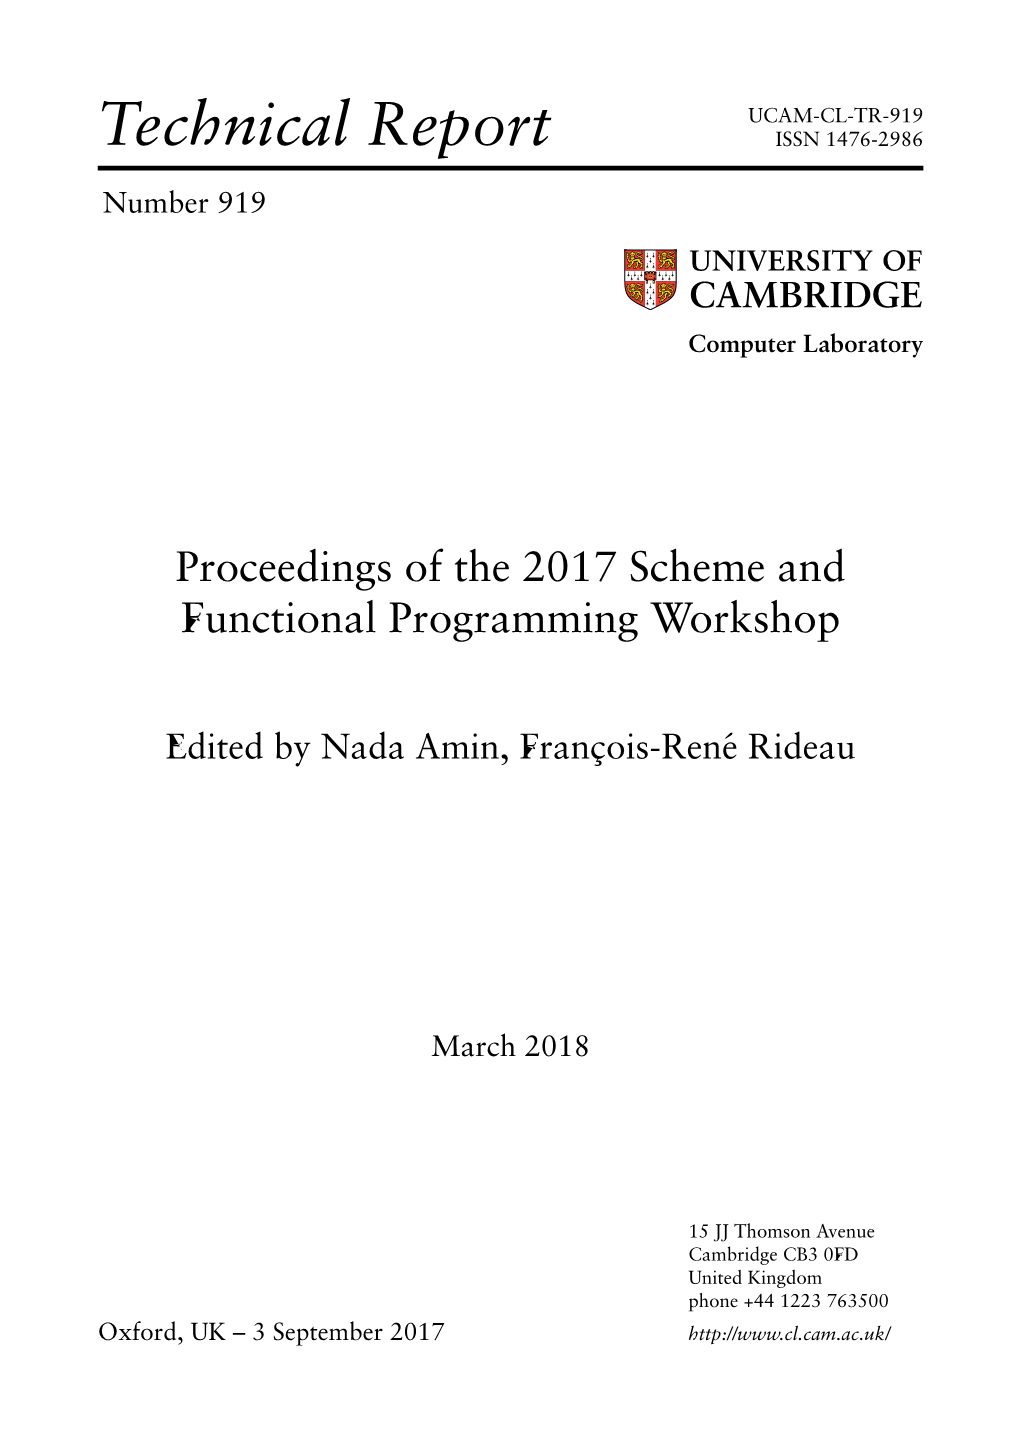 Proceedings of the 2017 Scheme and Functional Programming Workshop